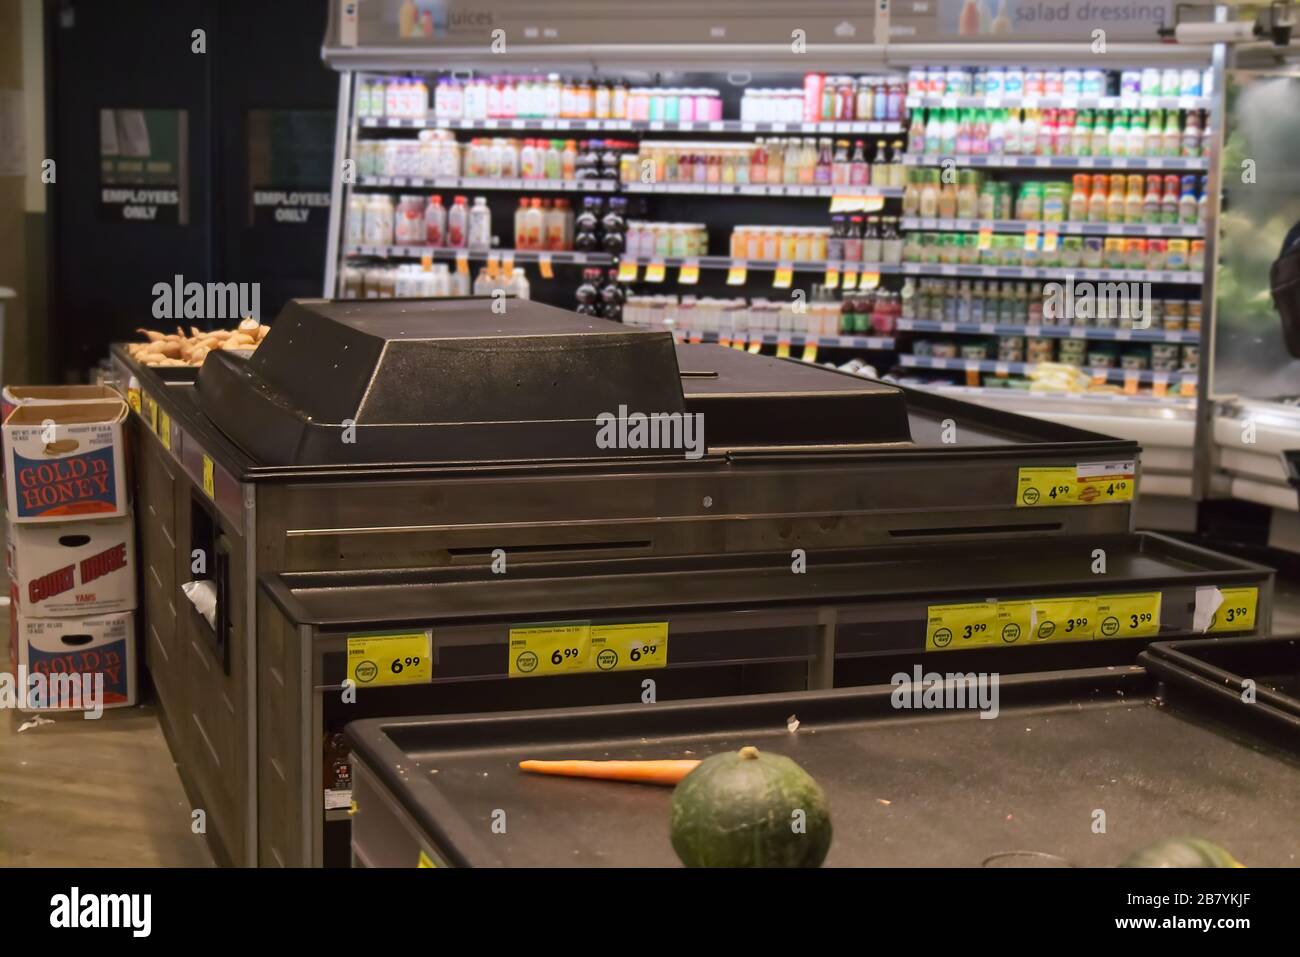 Vancouver, Canada - March 18,2020: Empty Safeway store shelves show shortage of food as Coronavirus (COVID-19) fears people to buy more supplies Stock Photo